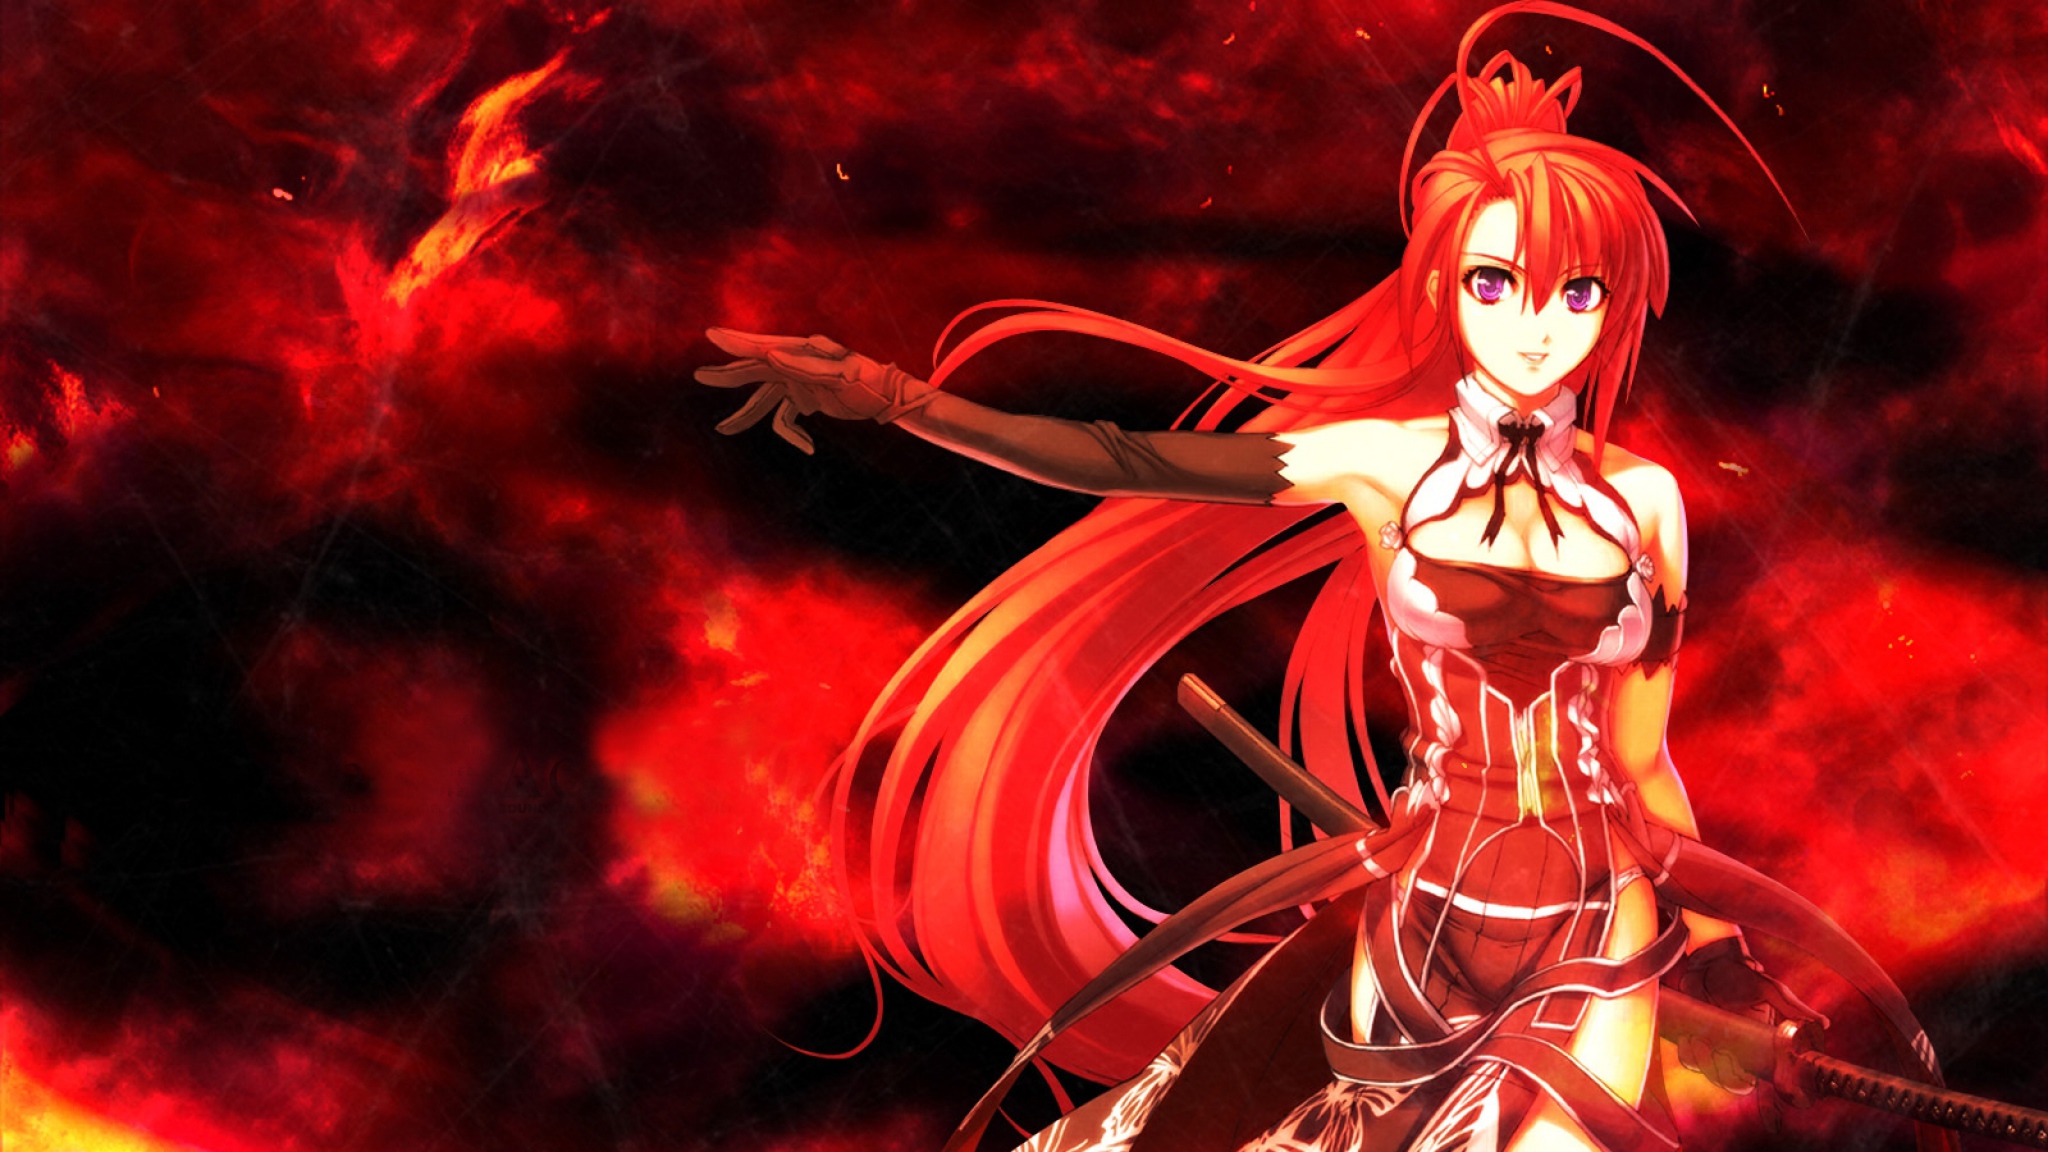 Free download Download Wallpaper 2048x1152 anime girl red hair sword background [2048x1152] for your Desktop, Mobile & Tablet. Explore 2048x1152 Anime Wallpaperx1152 Wallpaper for YouTube, 2048x1152 Gaming Wallpaper, 2048x1152 Wallpaper